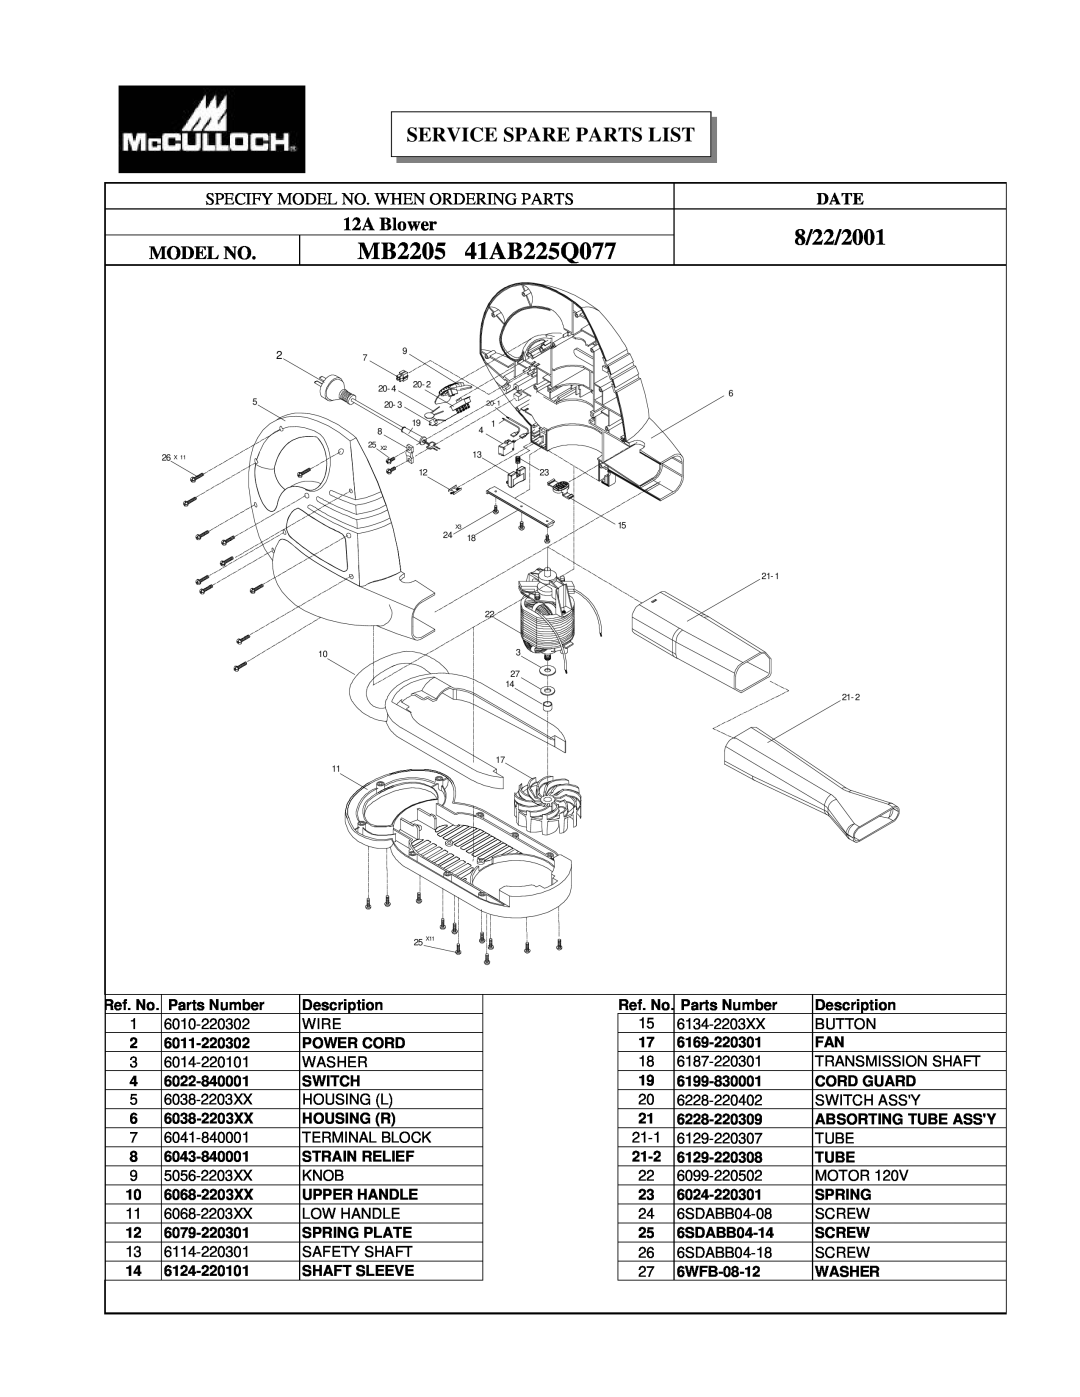 McCulloch MCB2205 user manual MB2205 41AB225Q077, 8/22/2001, 12A Blower, Specify Model No. When Ordering Parts, Date 